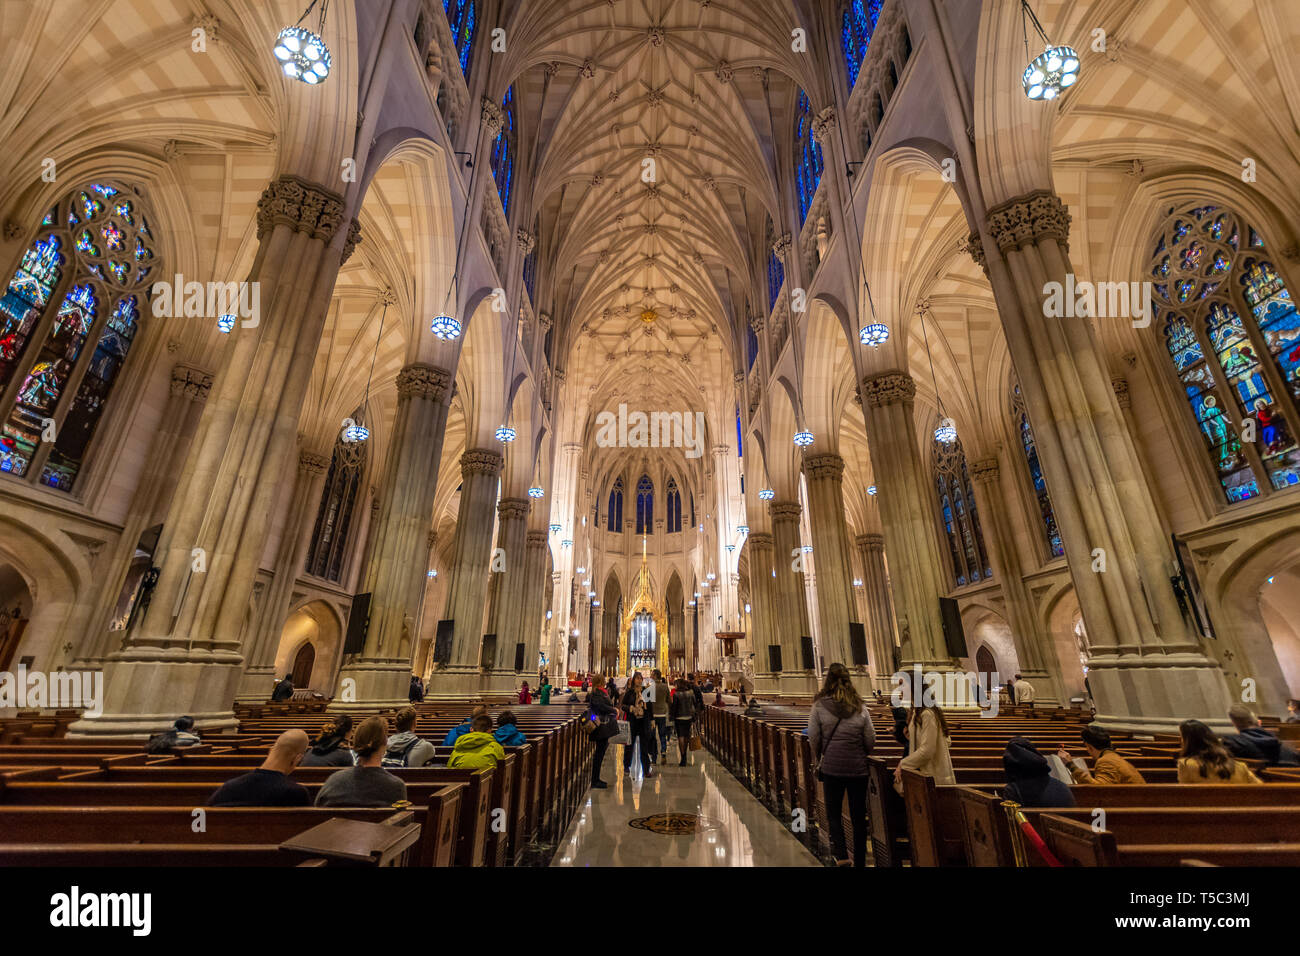 The beautiful interior of St. Patricks Cathedral, New York Stock Photo